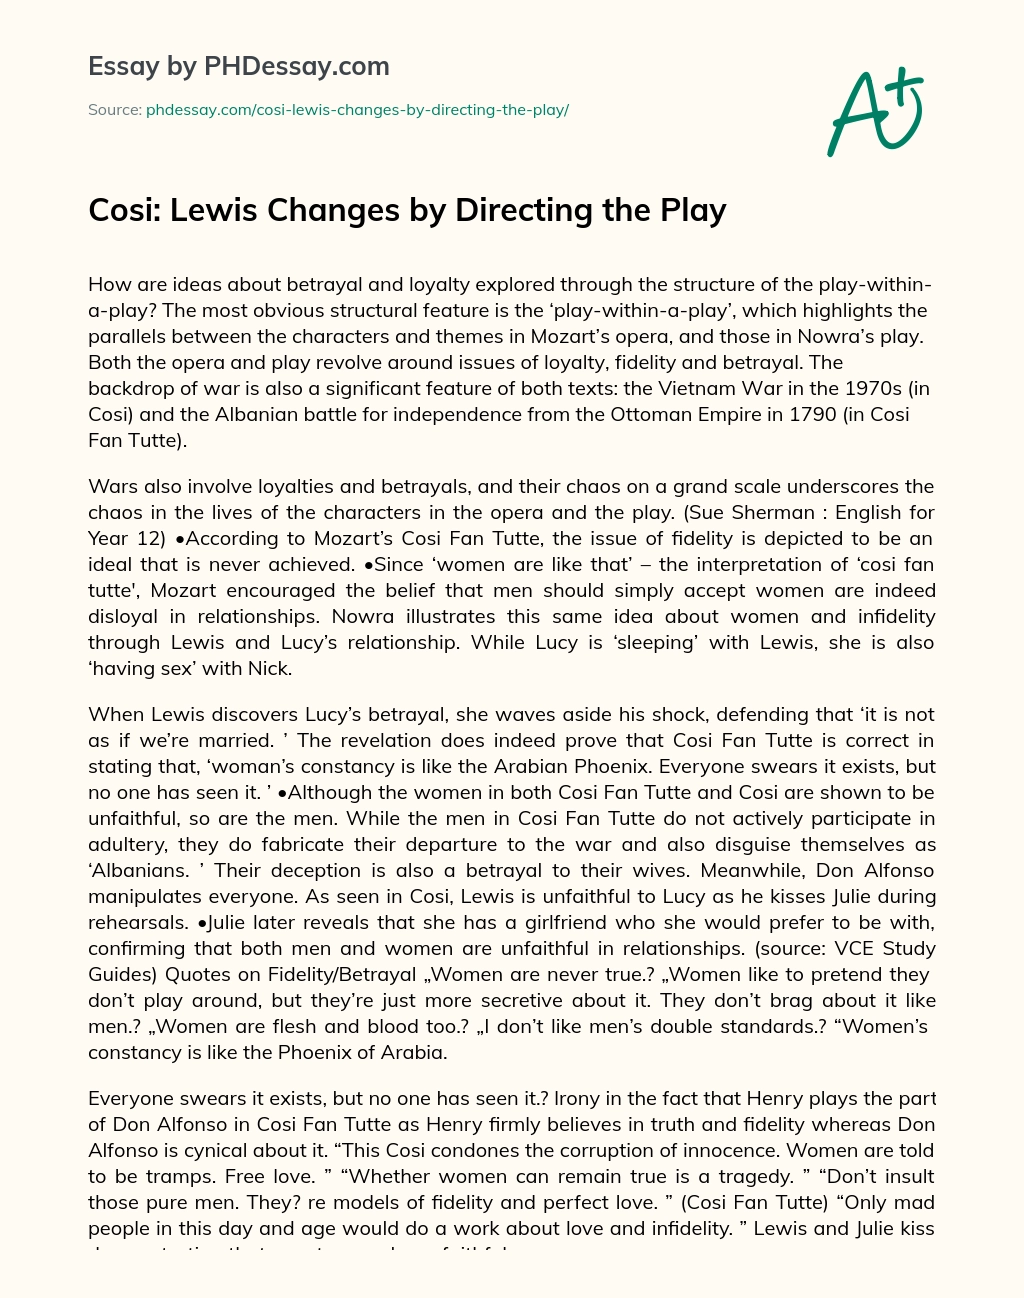 Cosi: Lewis Changes by Directing the Play essay